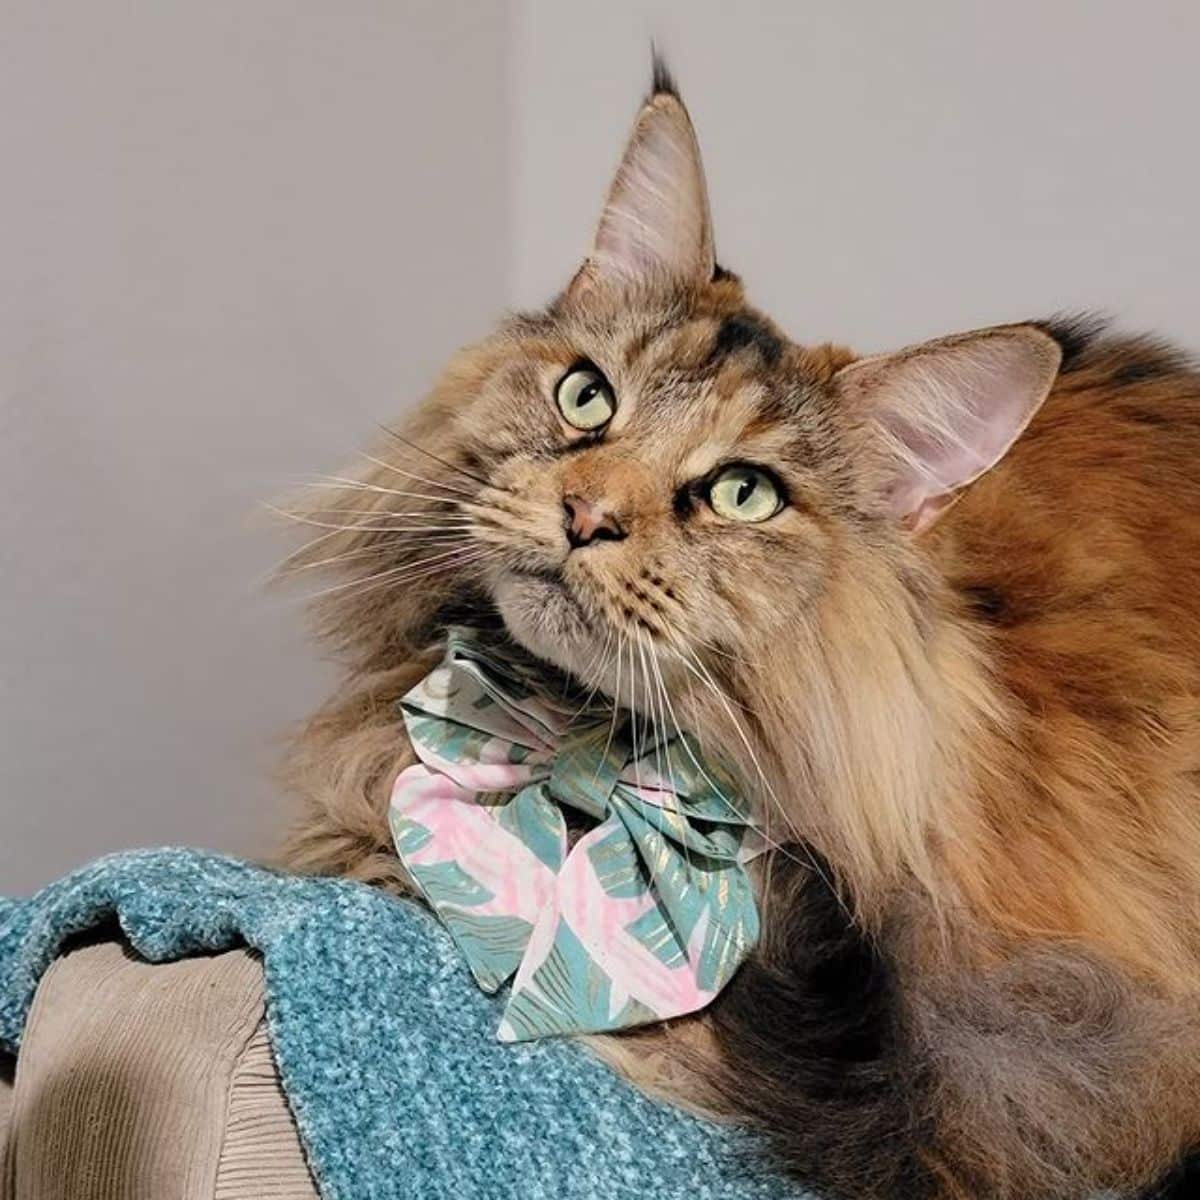 A fluffy tortoise maine coon with a bowtie sitting on a couch.